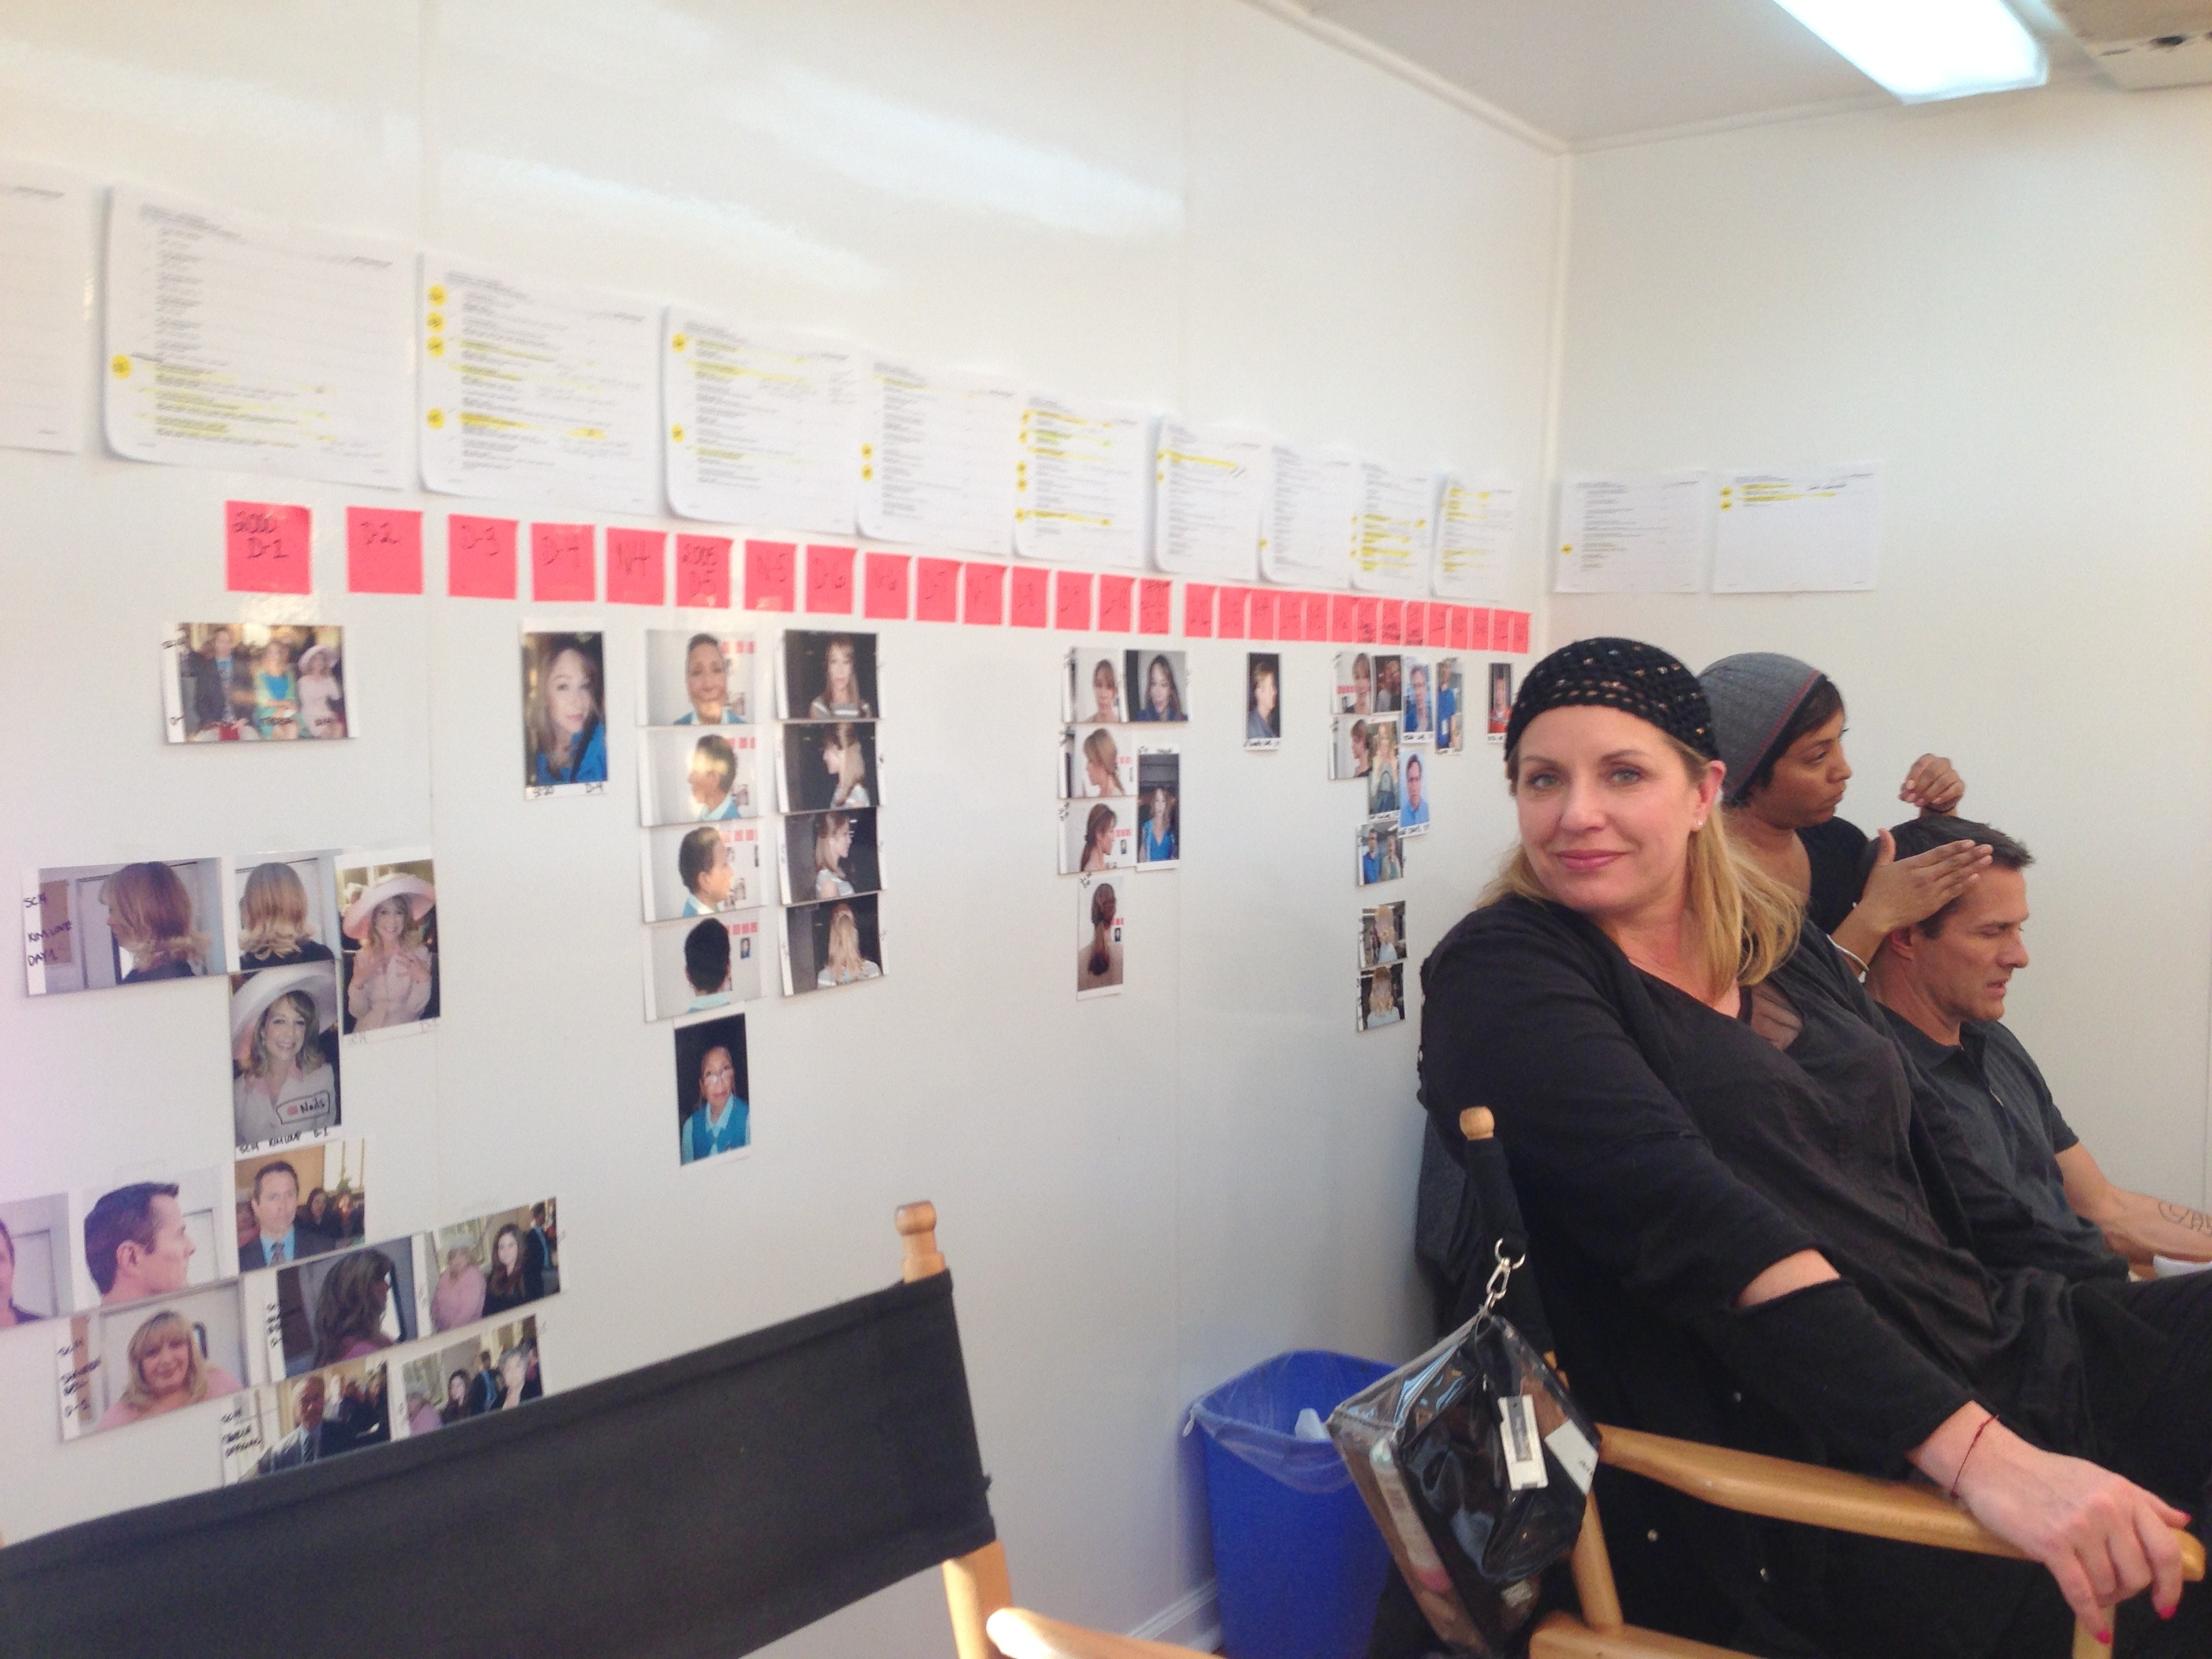 Michelle is the master of makeup continuity. Here we see Michelle organizing 27 different makeup looks and 46 flashbacks. The mini-series completed shooting in 3 weeks without her missing a beat.